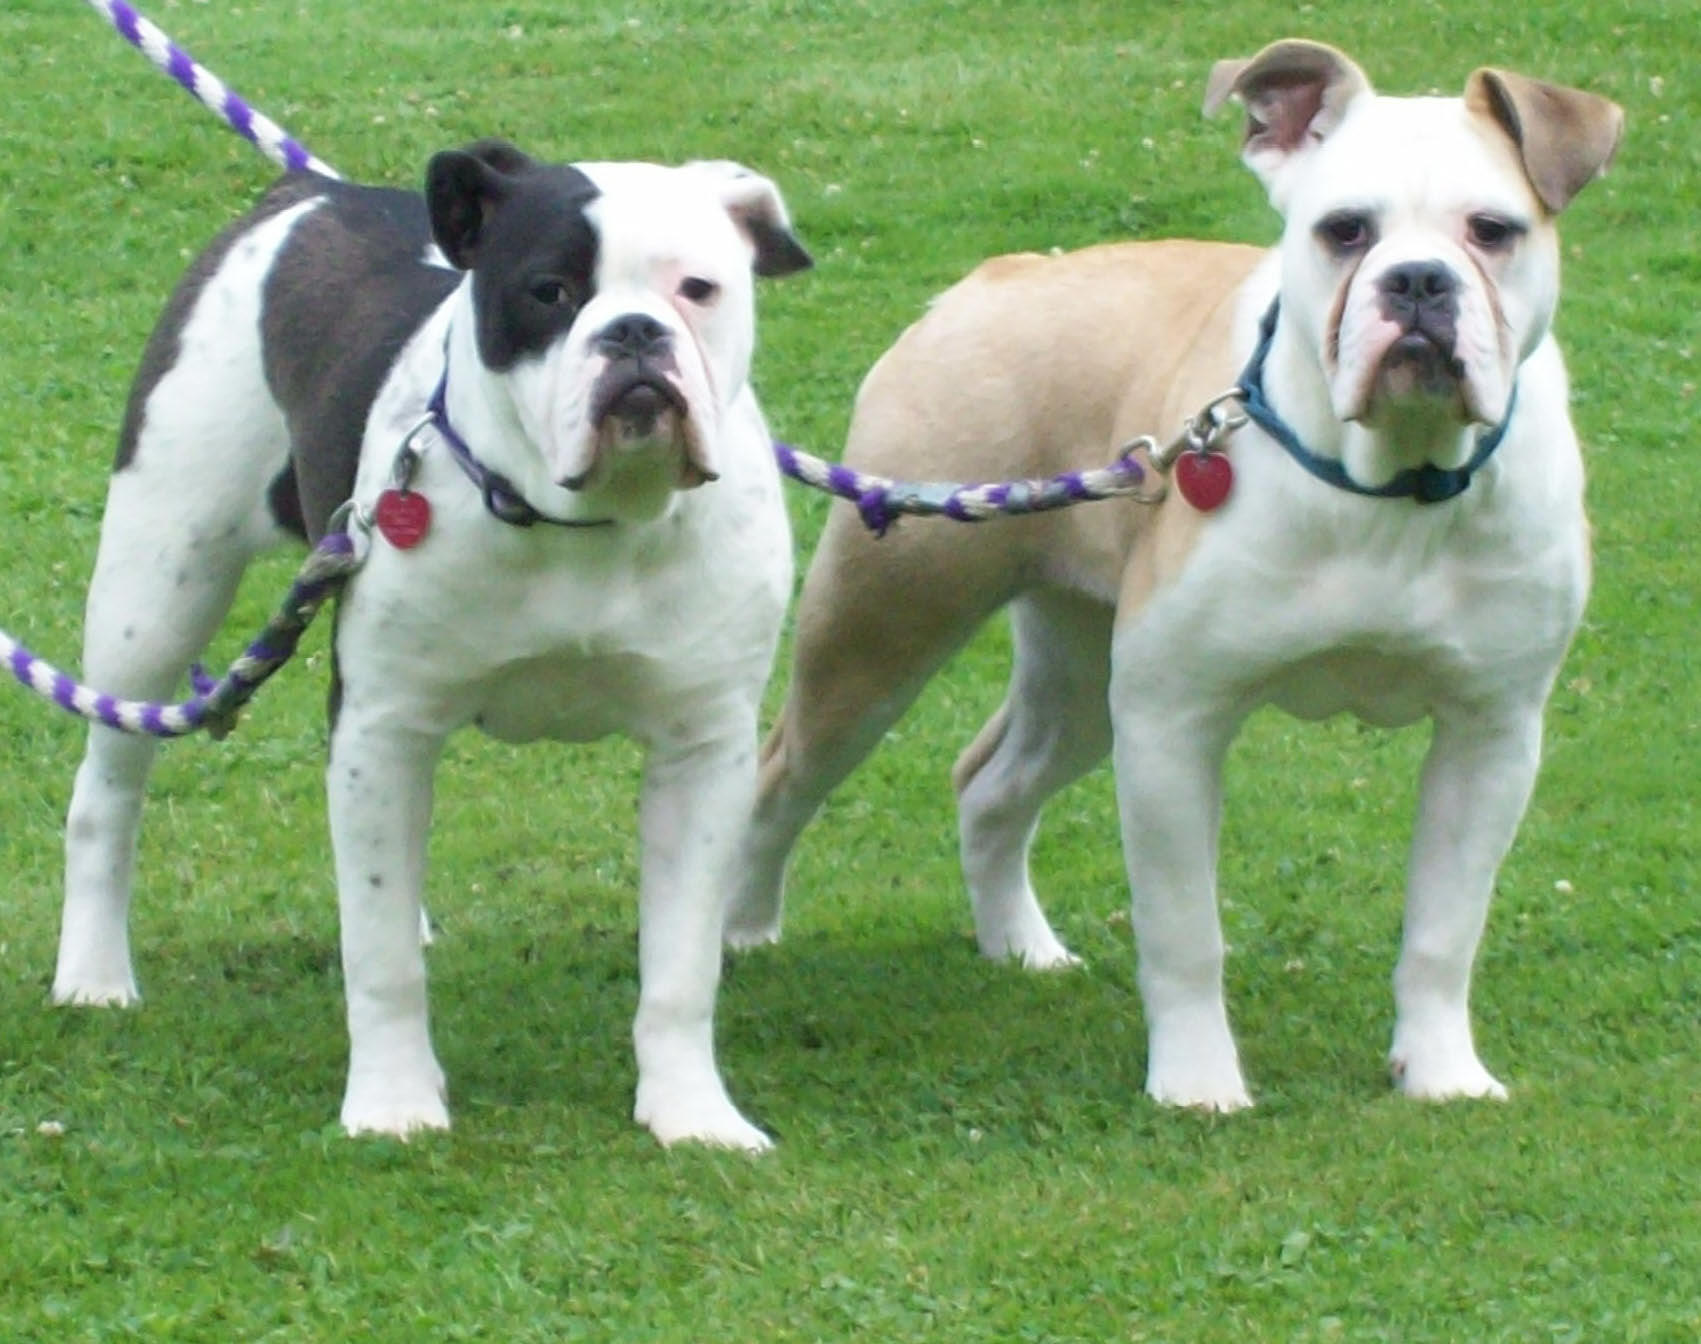 Sophie & Chloe 8 months old olde english bulldogges